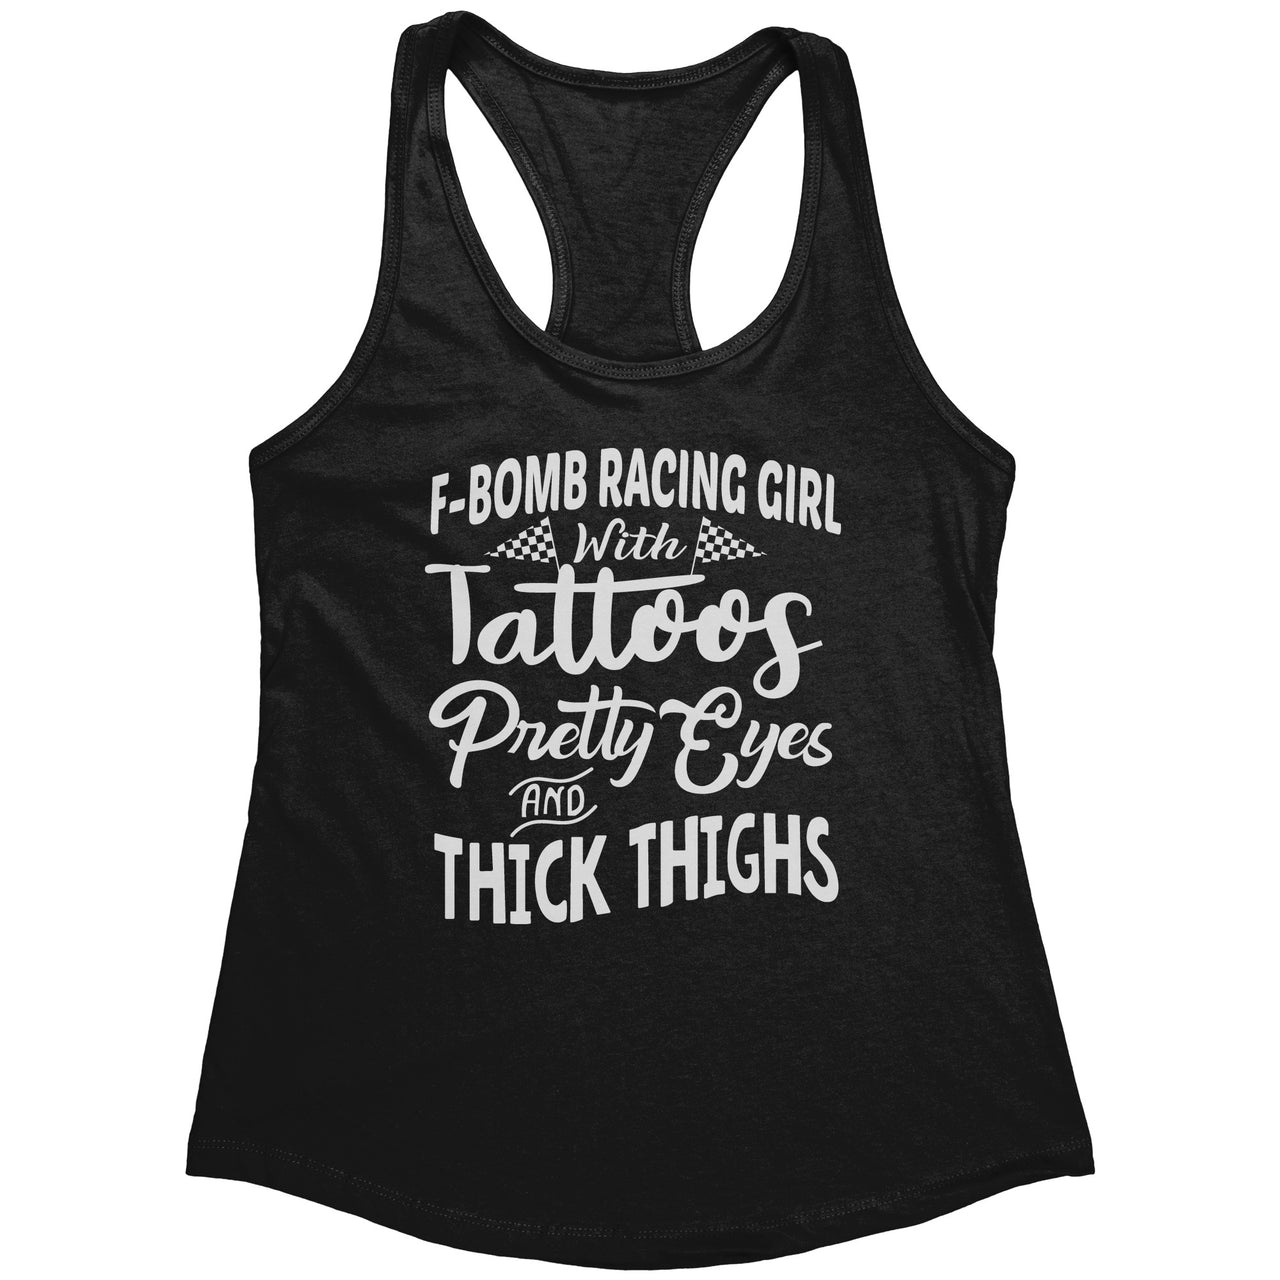 F-Bomb Racing Girl With Tattoos Pretty Eyes And Thick Thighs Tank Tops